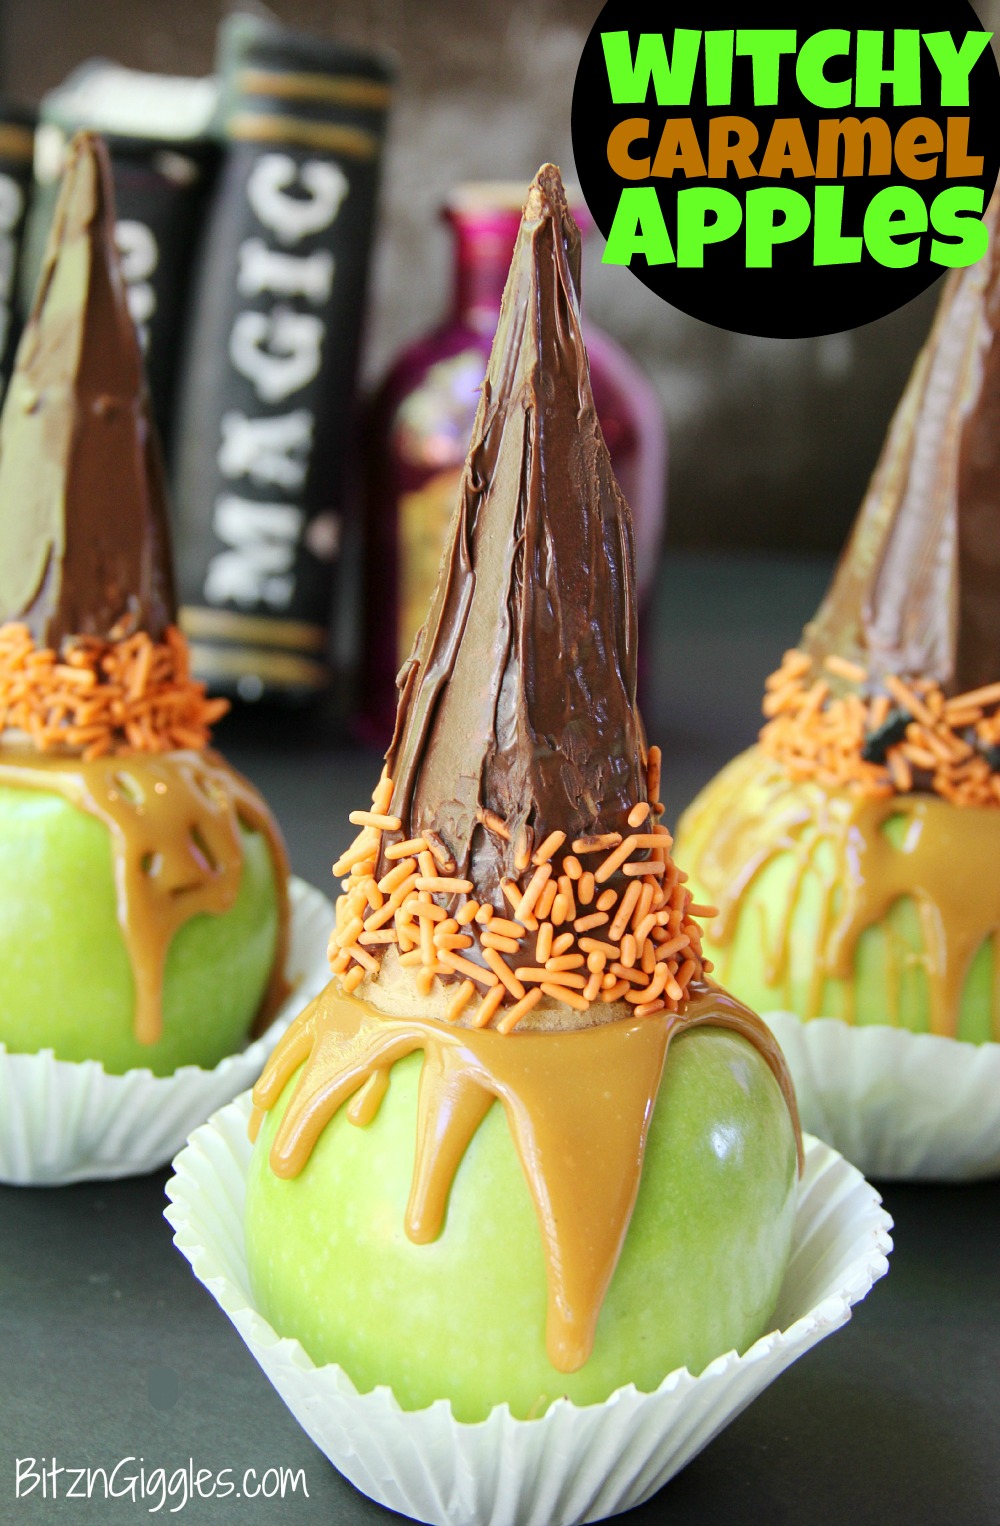 Witchy Caramel Apples - Crisp and tart Granny Smith apples covered with melted caramel and topped with a chocolate covered sugar cone garnished with some Halloween-themed sprinkles. 